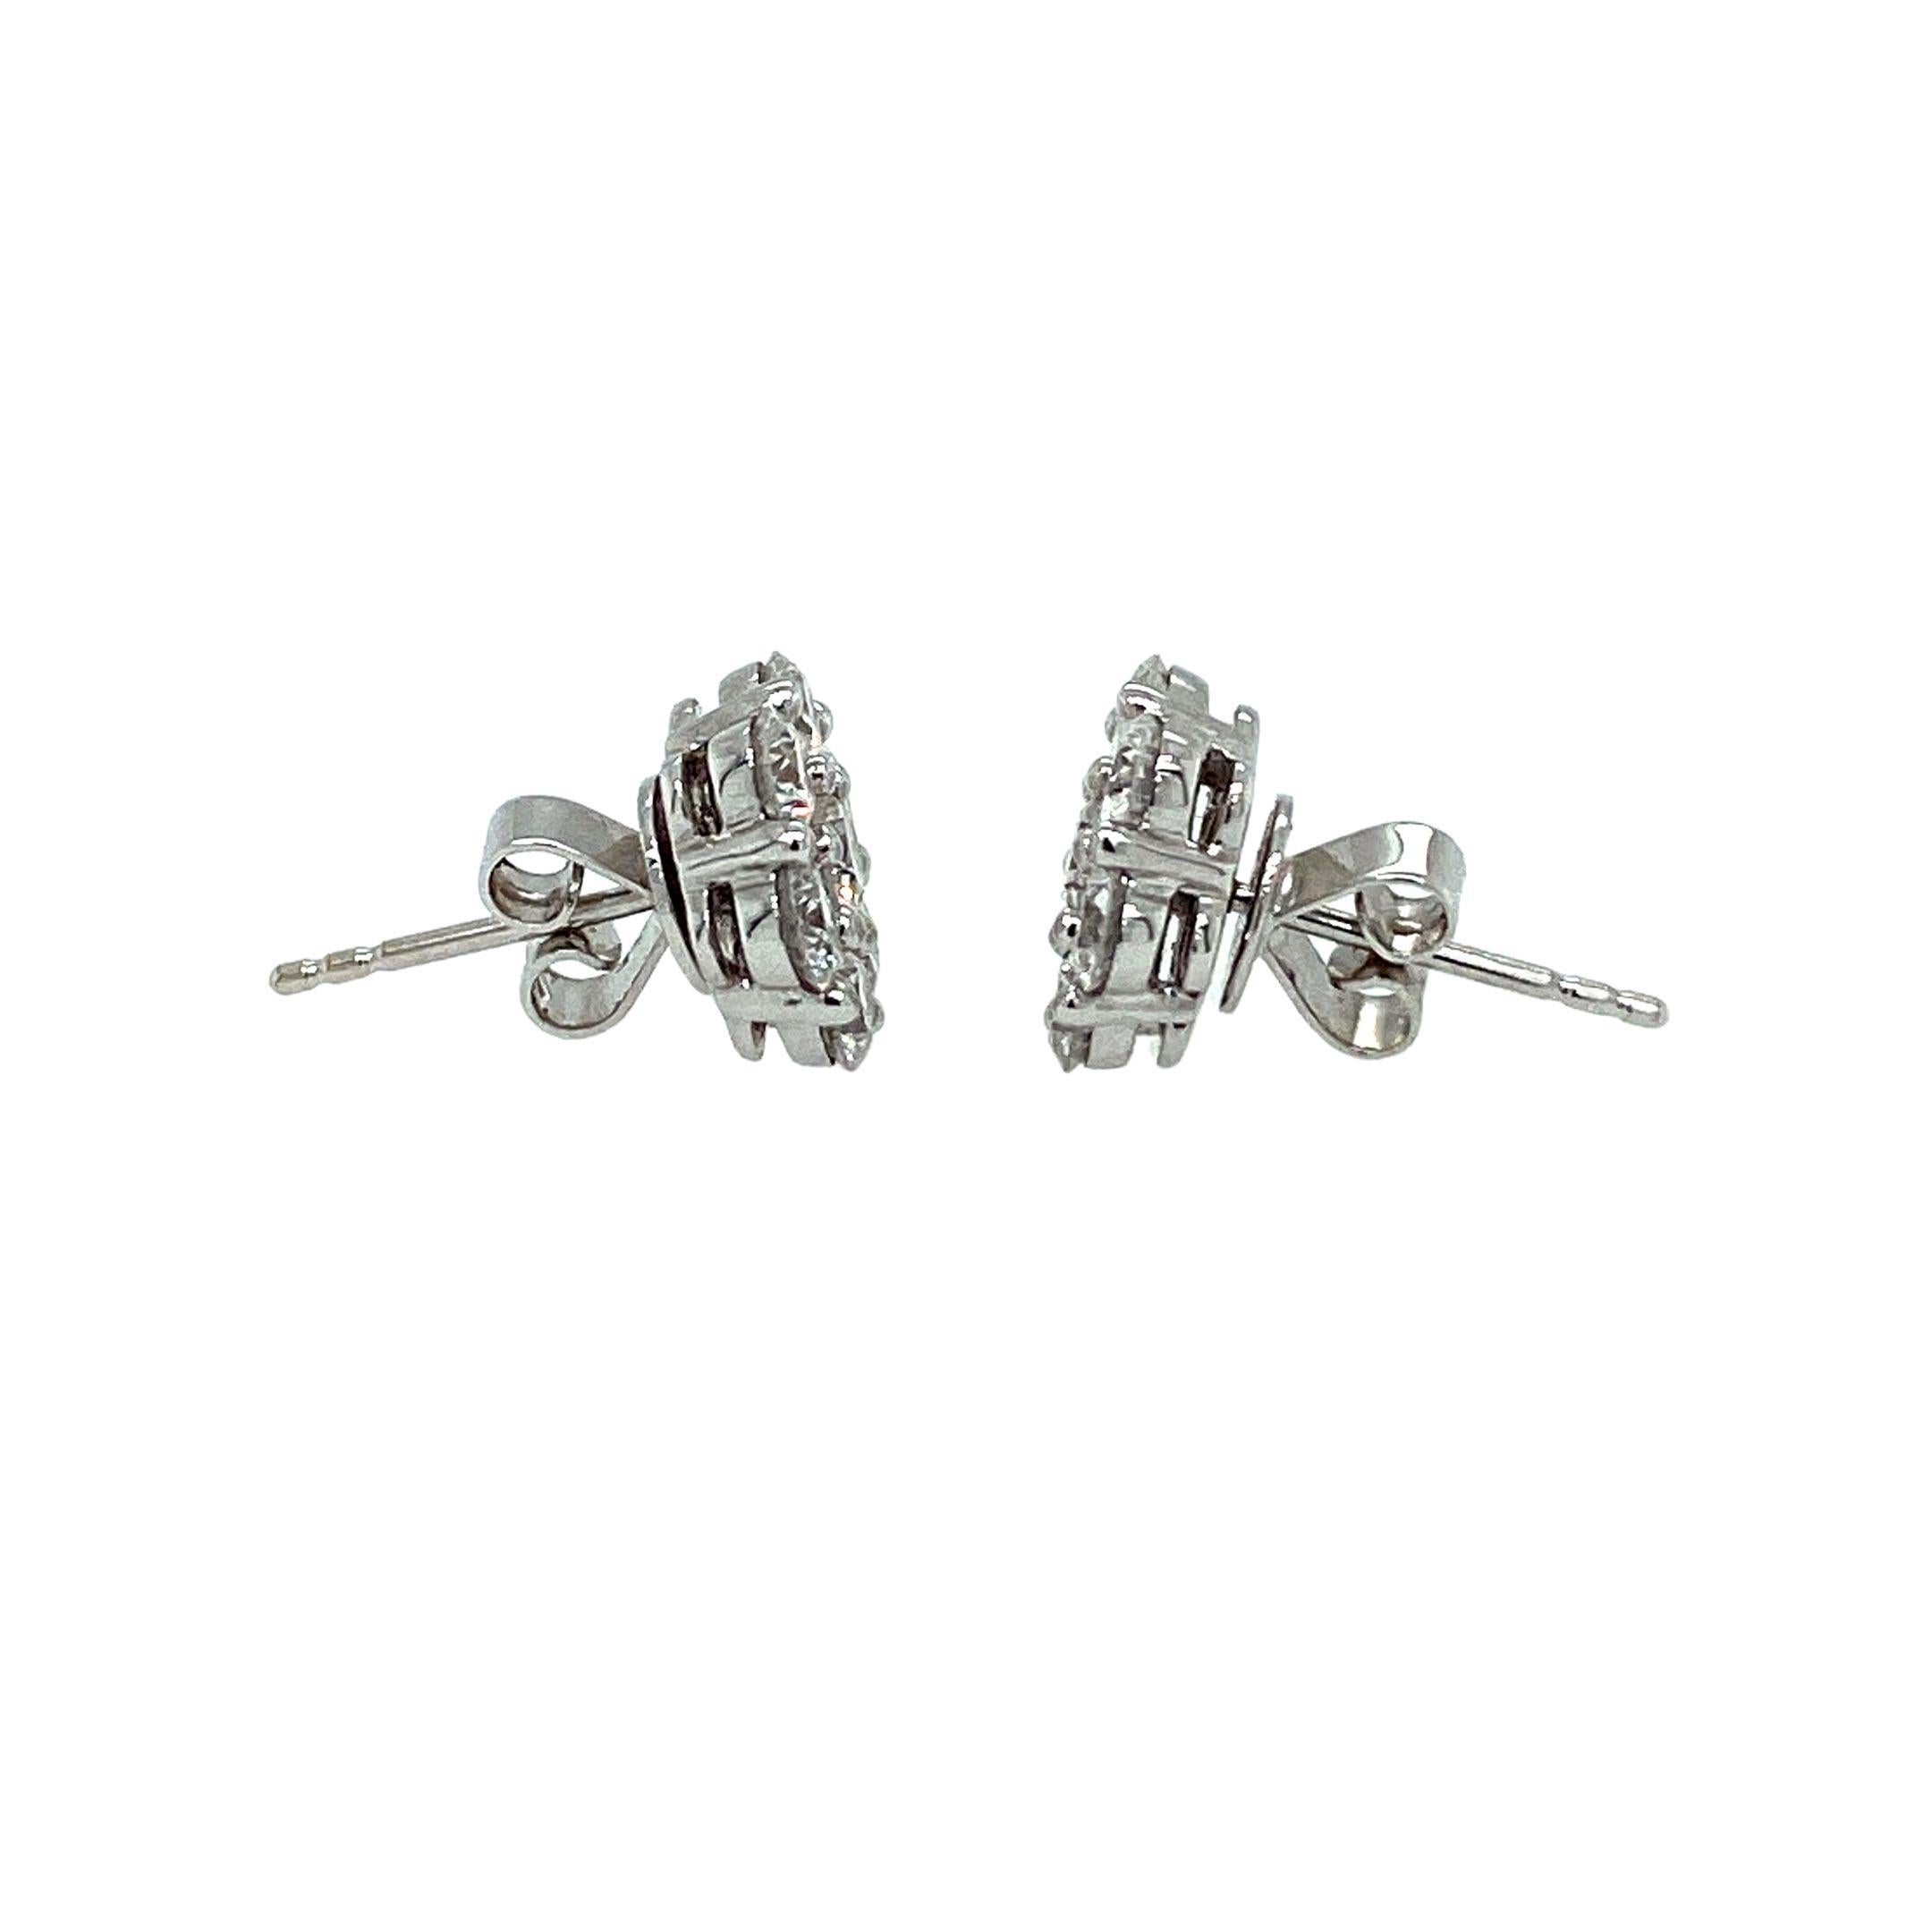 Rose Shaped Diamond Stud Earrings made with natural brilliant cut diamonds. Total Weight: 2.03 carats, Diamond Quantity: 14 (round diamonds), Color: H. Set on 18 karat white gold, pushback setting.